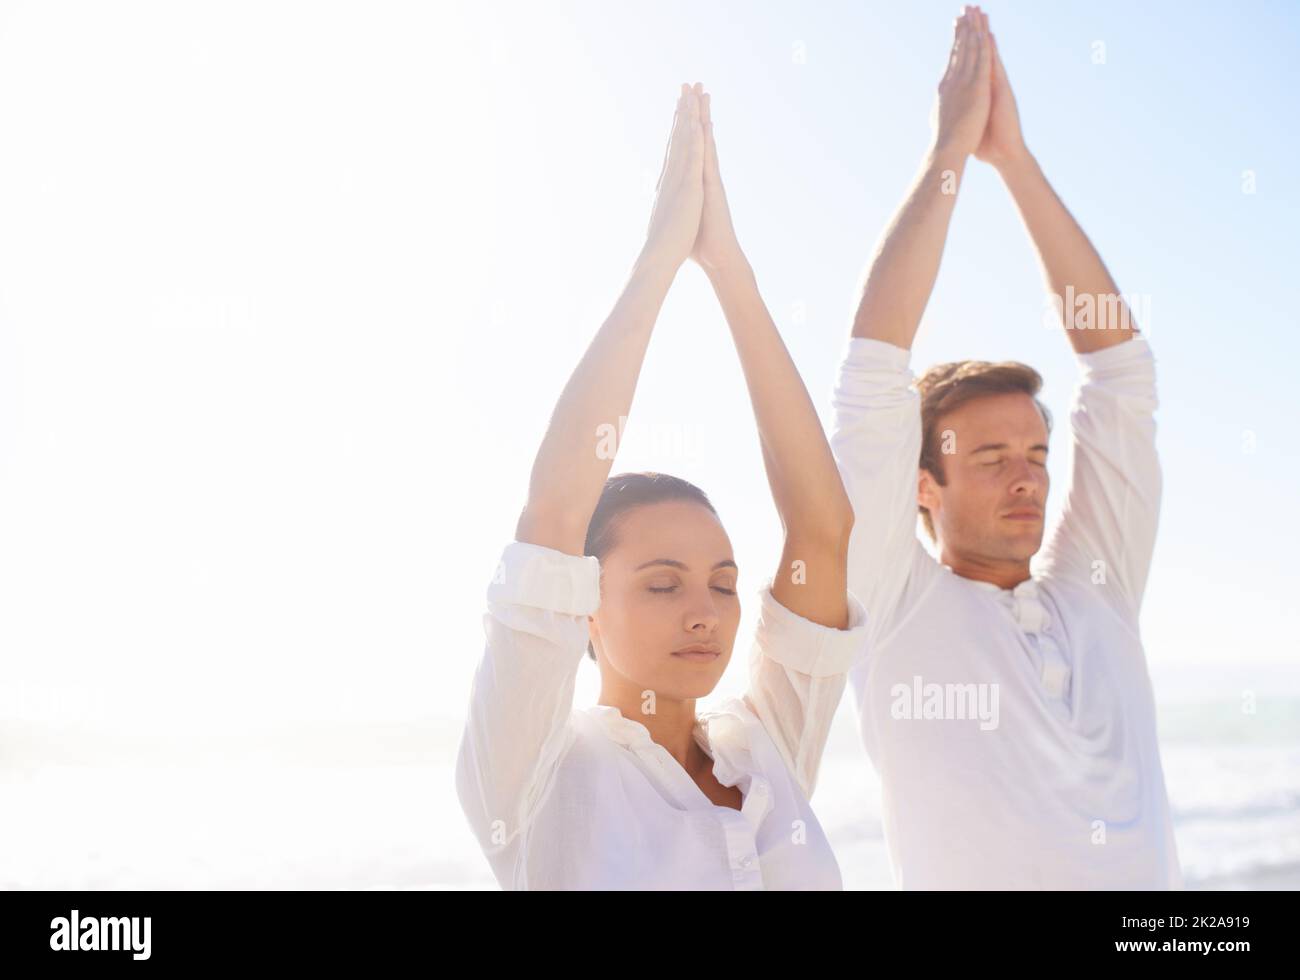 Finding balance in nature. Two young people meditating on the beach. Stock Photo